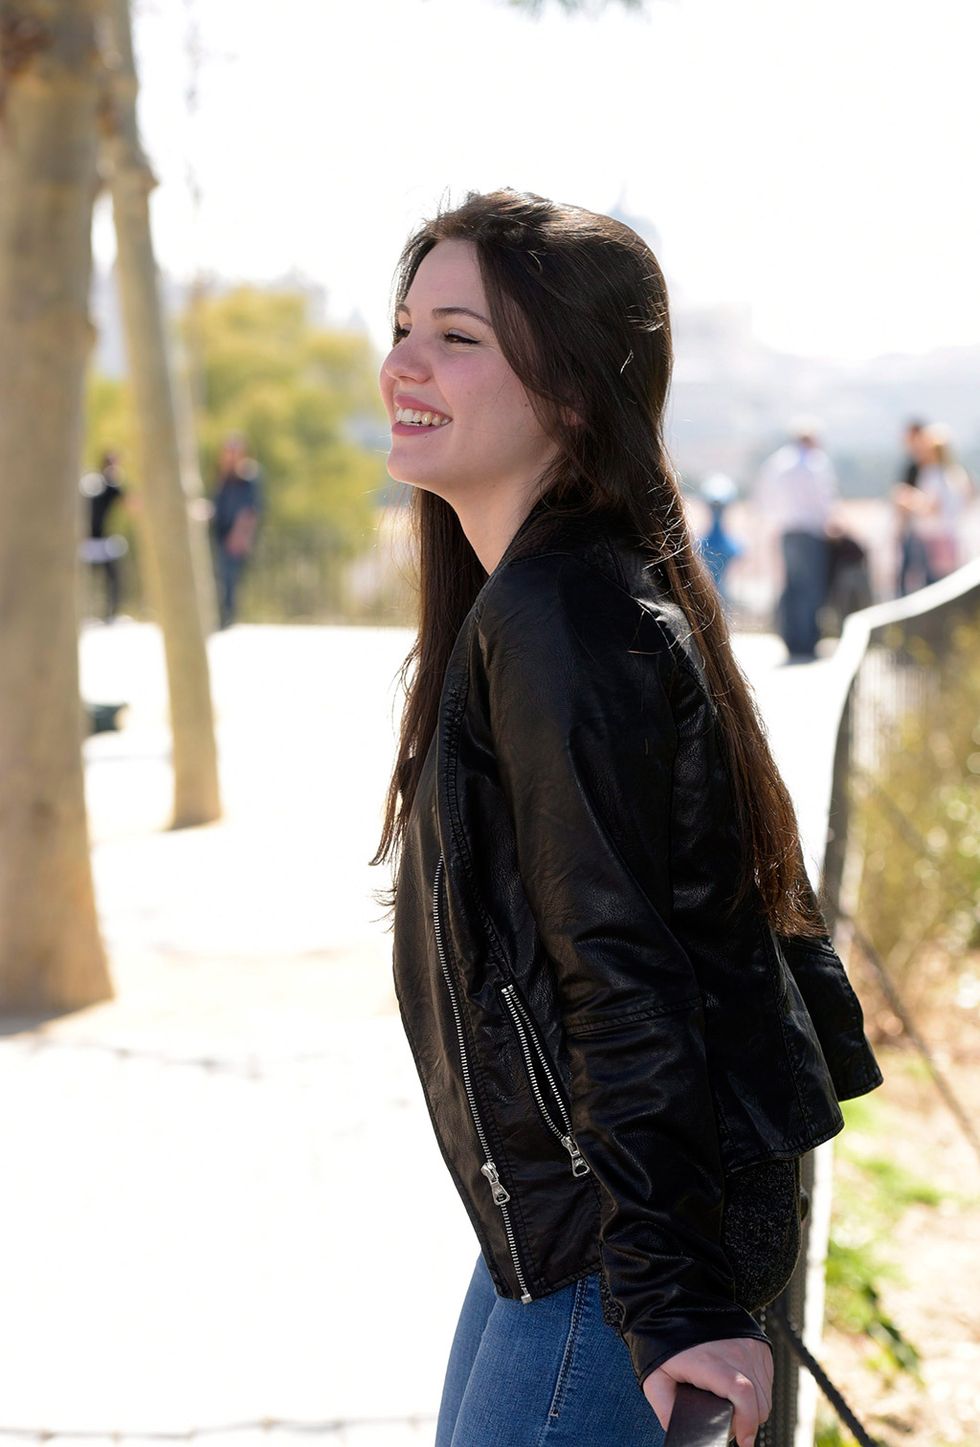 Hair, Leather, Clothing, Jacket, Leather jacket, Jeans, Beauty, Long hair, Textile, Outerwear, 